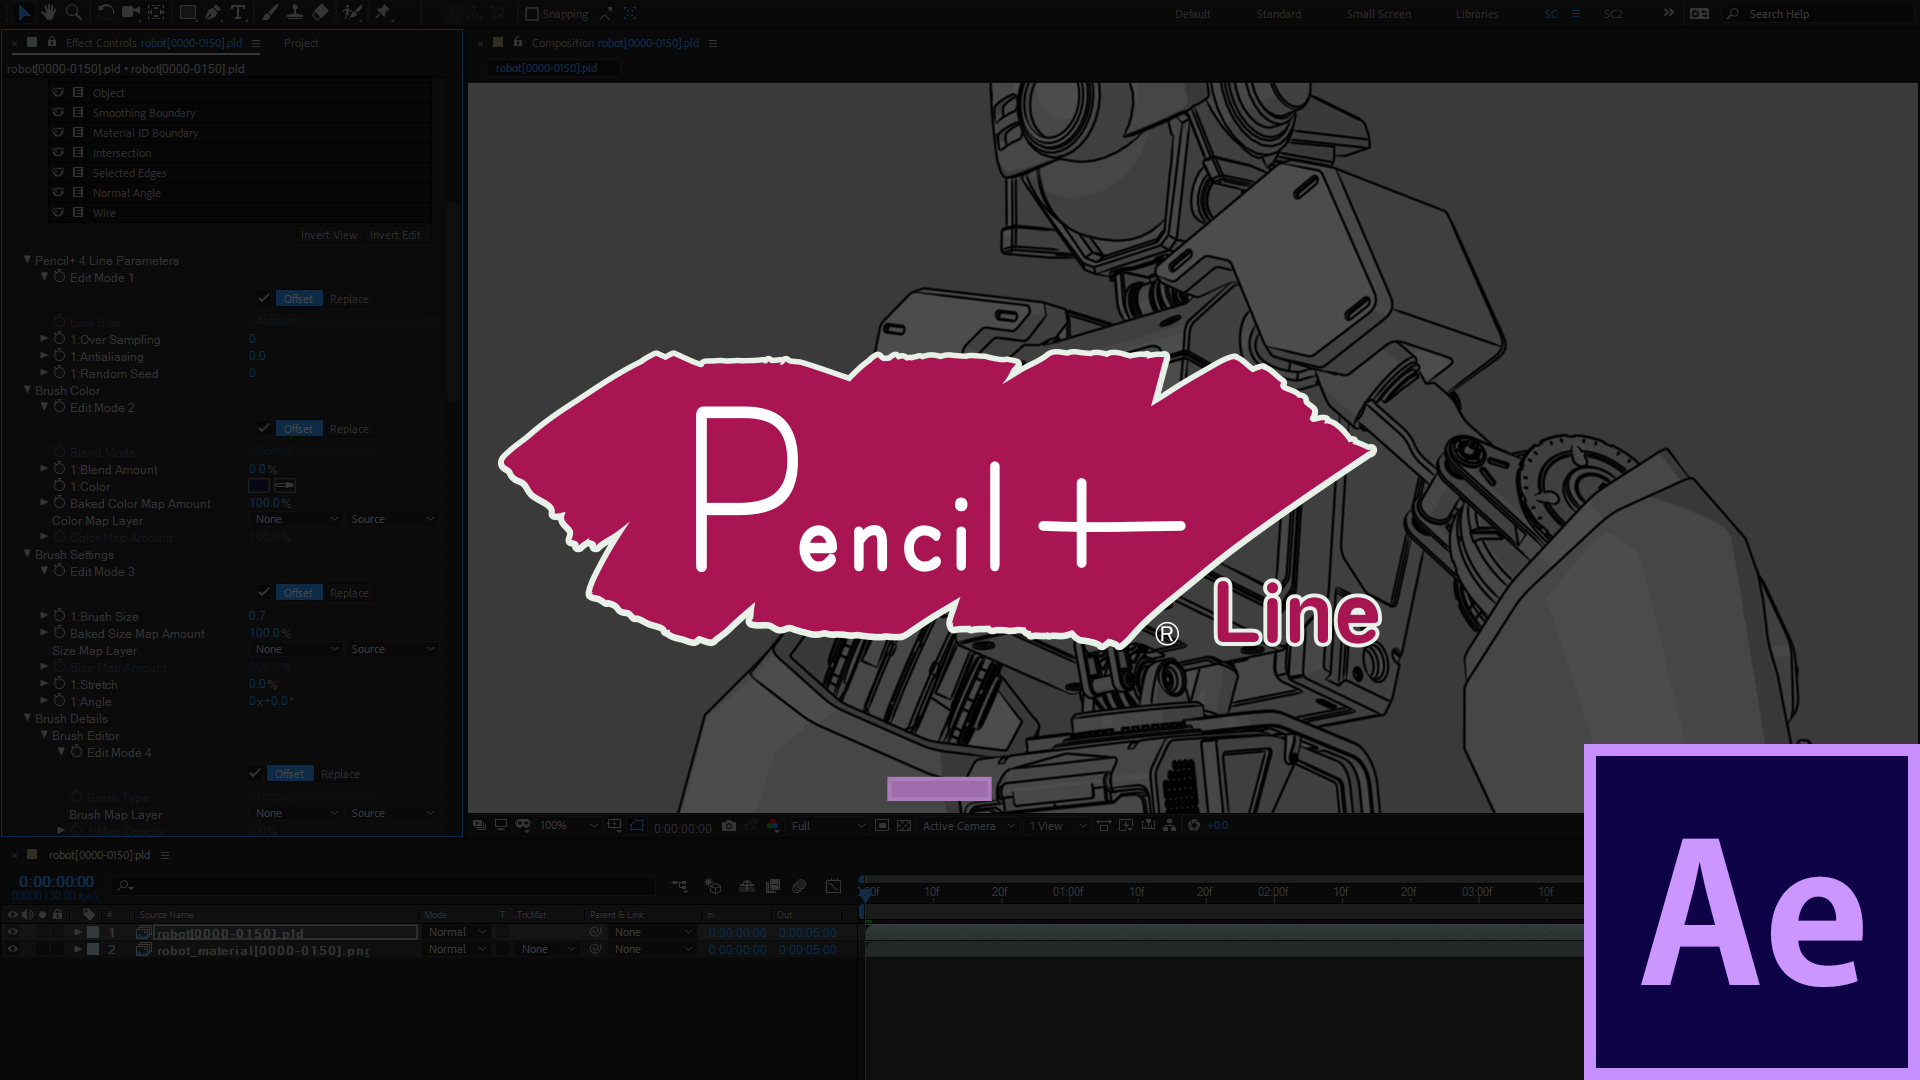 Pencil+ 4 Line| After Effects